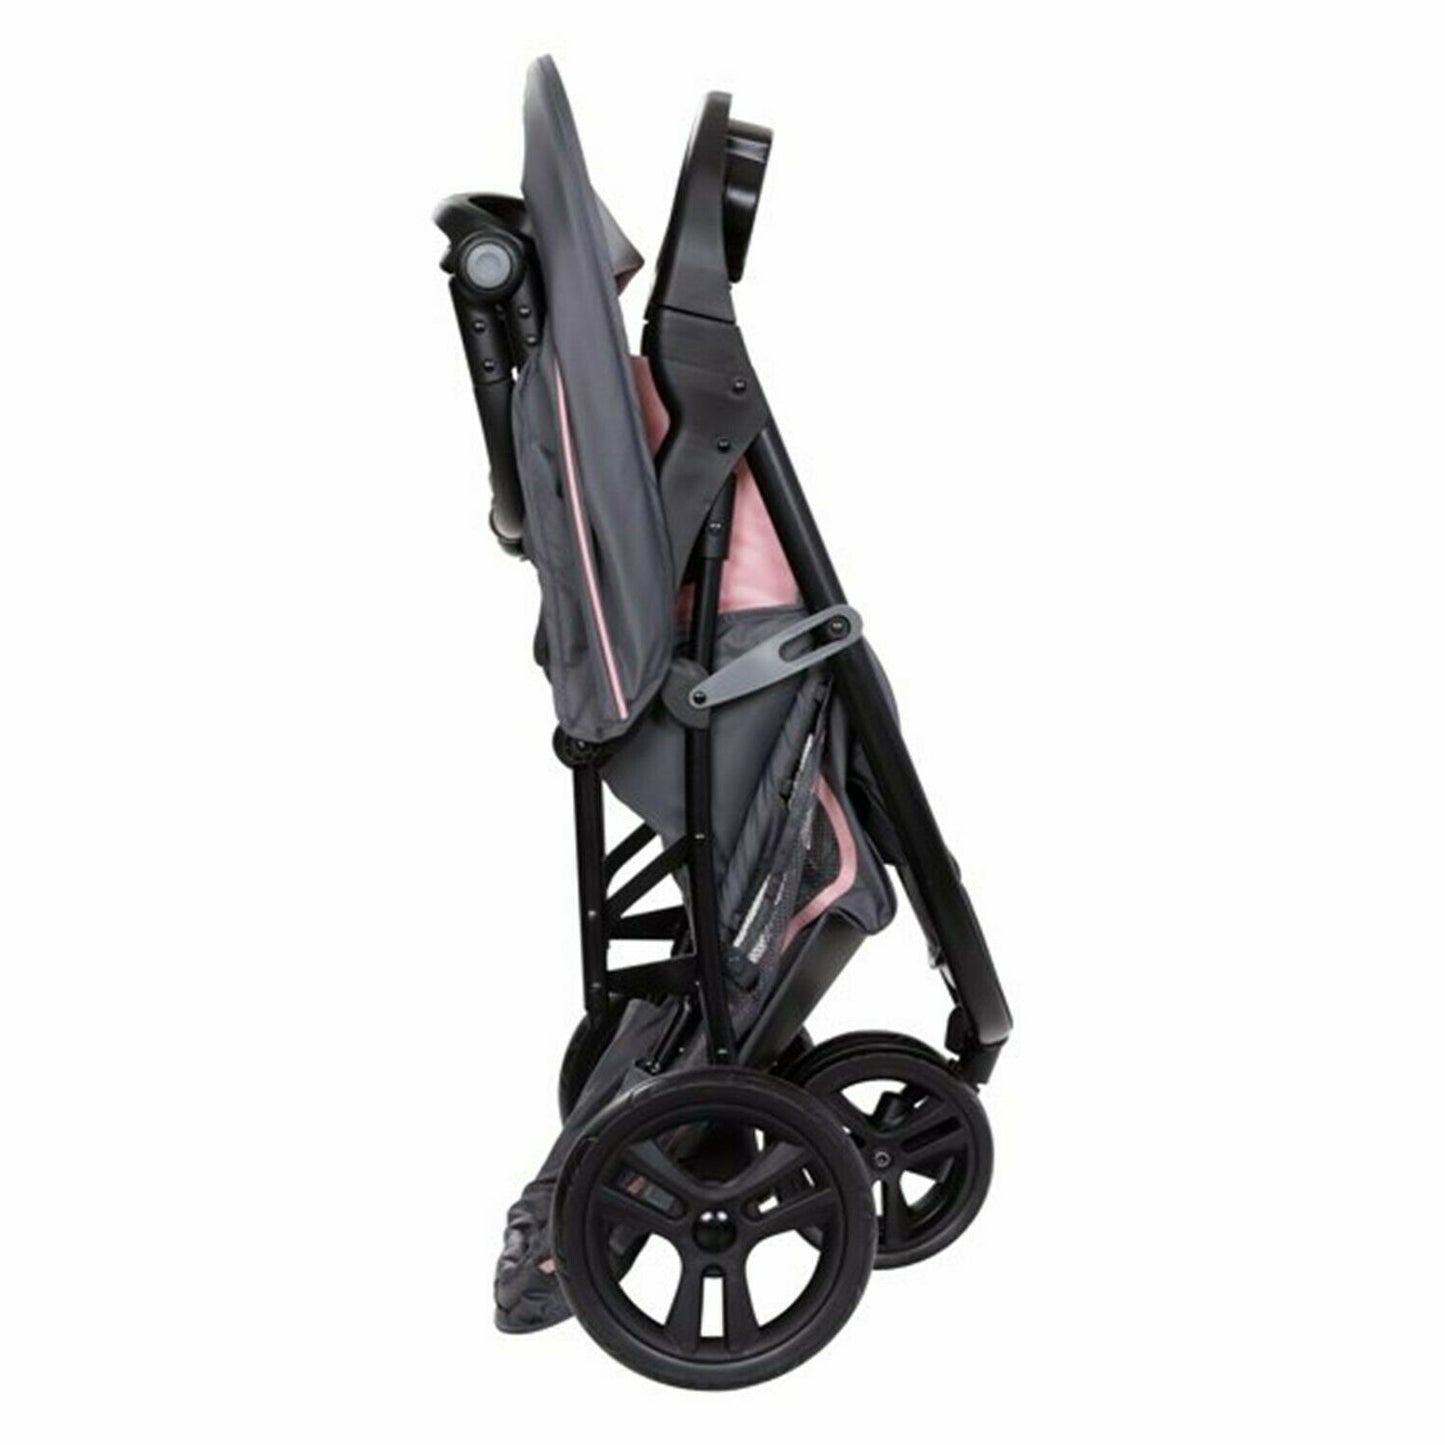 Pink Baby Stroller with Car Seat Travel System High Chair Playard Combo